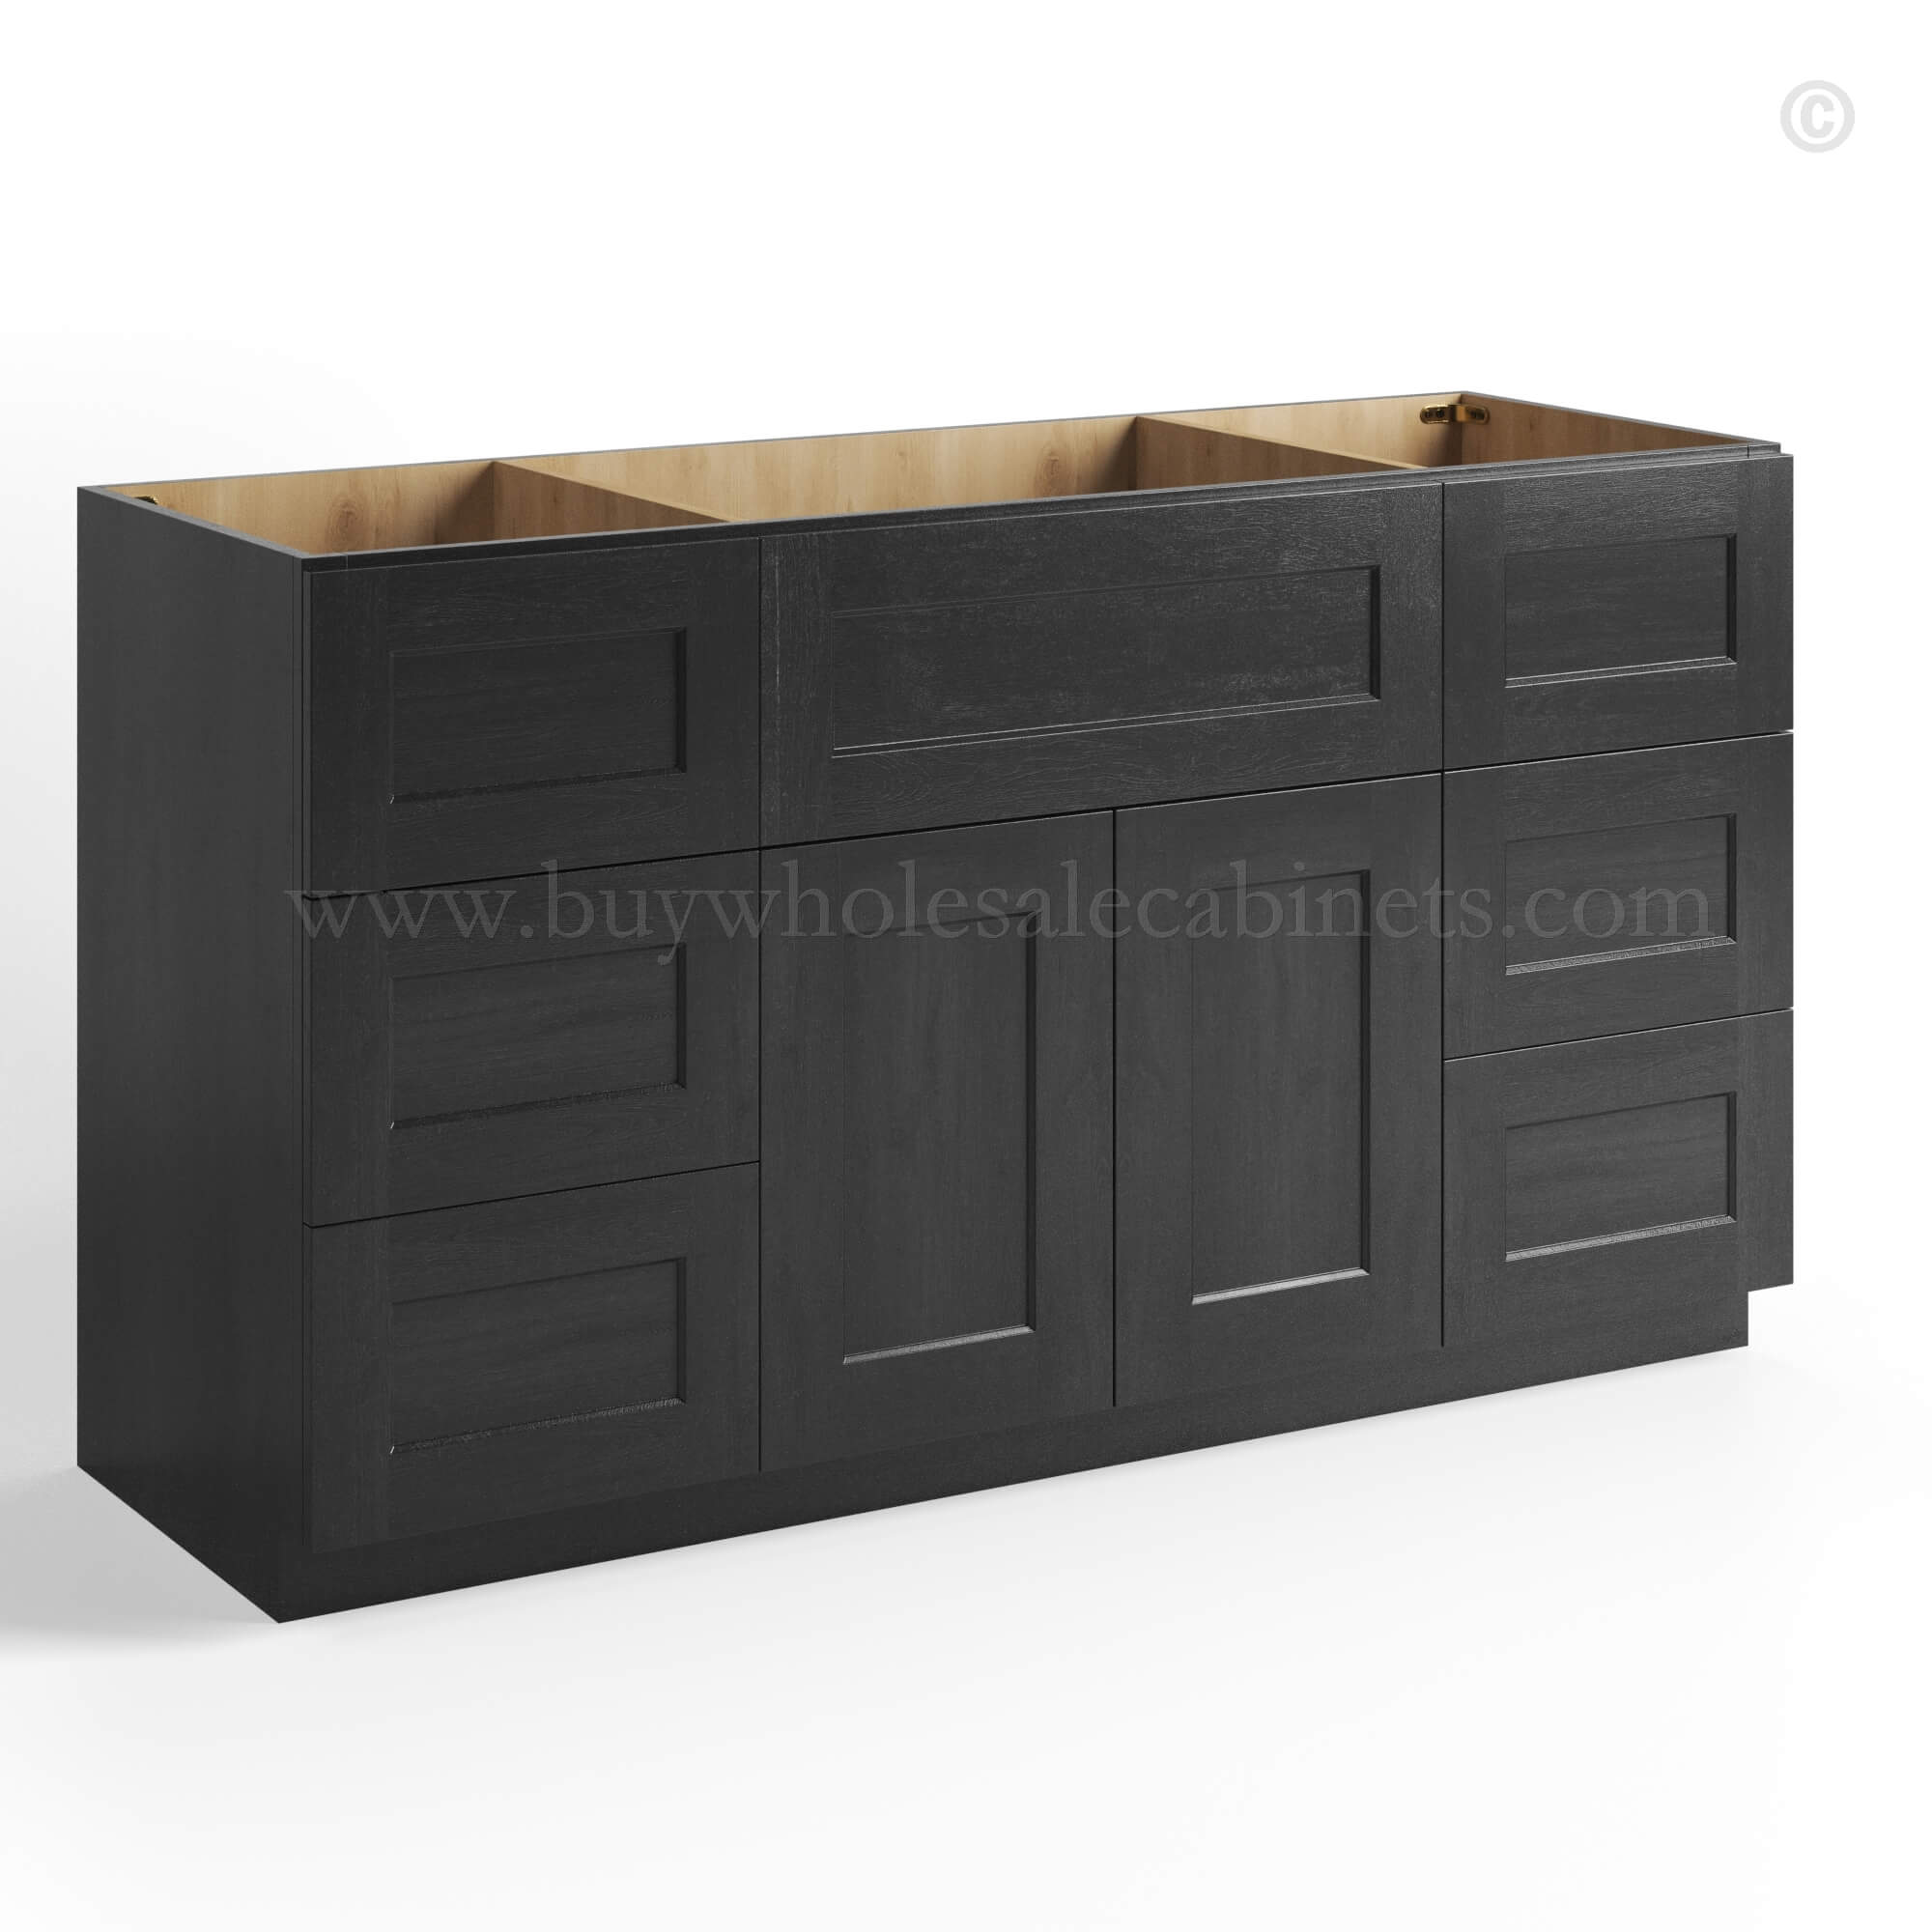 charcoal black shaker vanity sink base combo with three drawer left and right and sink centered, rta cabinets, wholesale cabinets